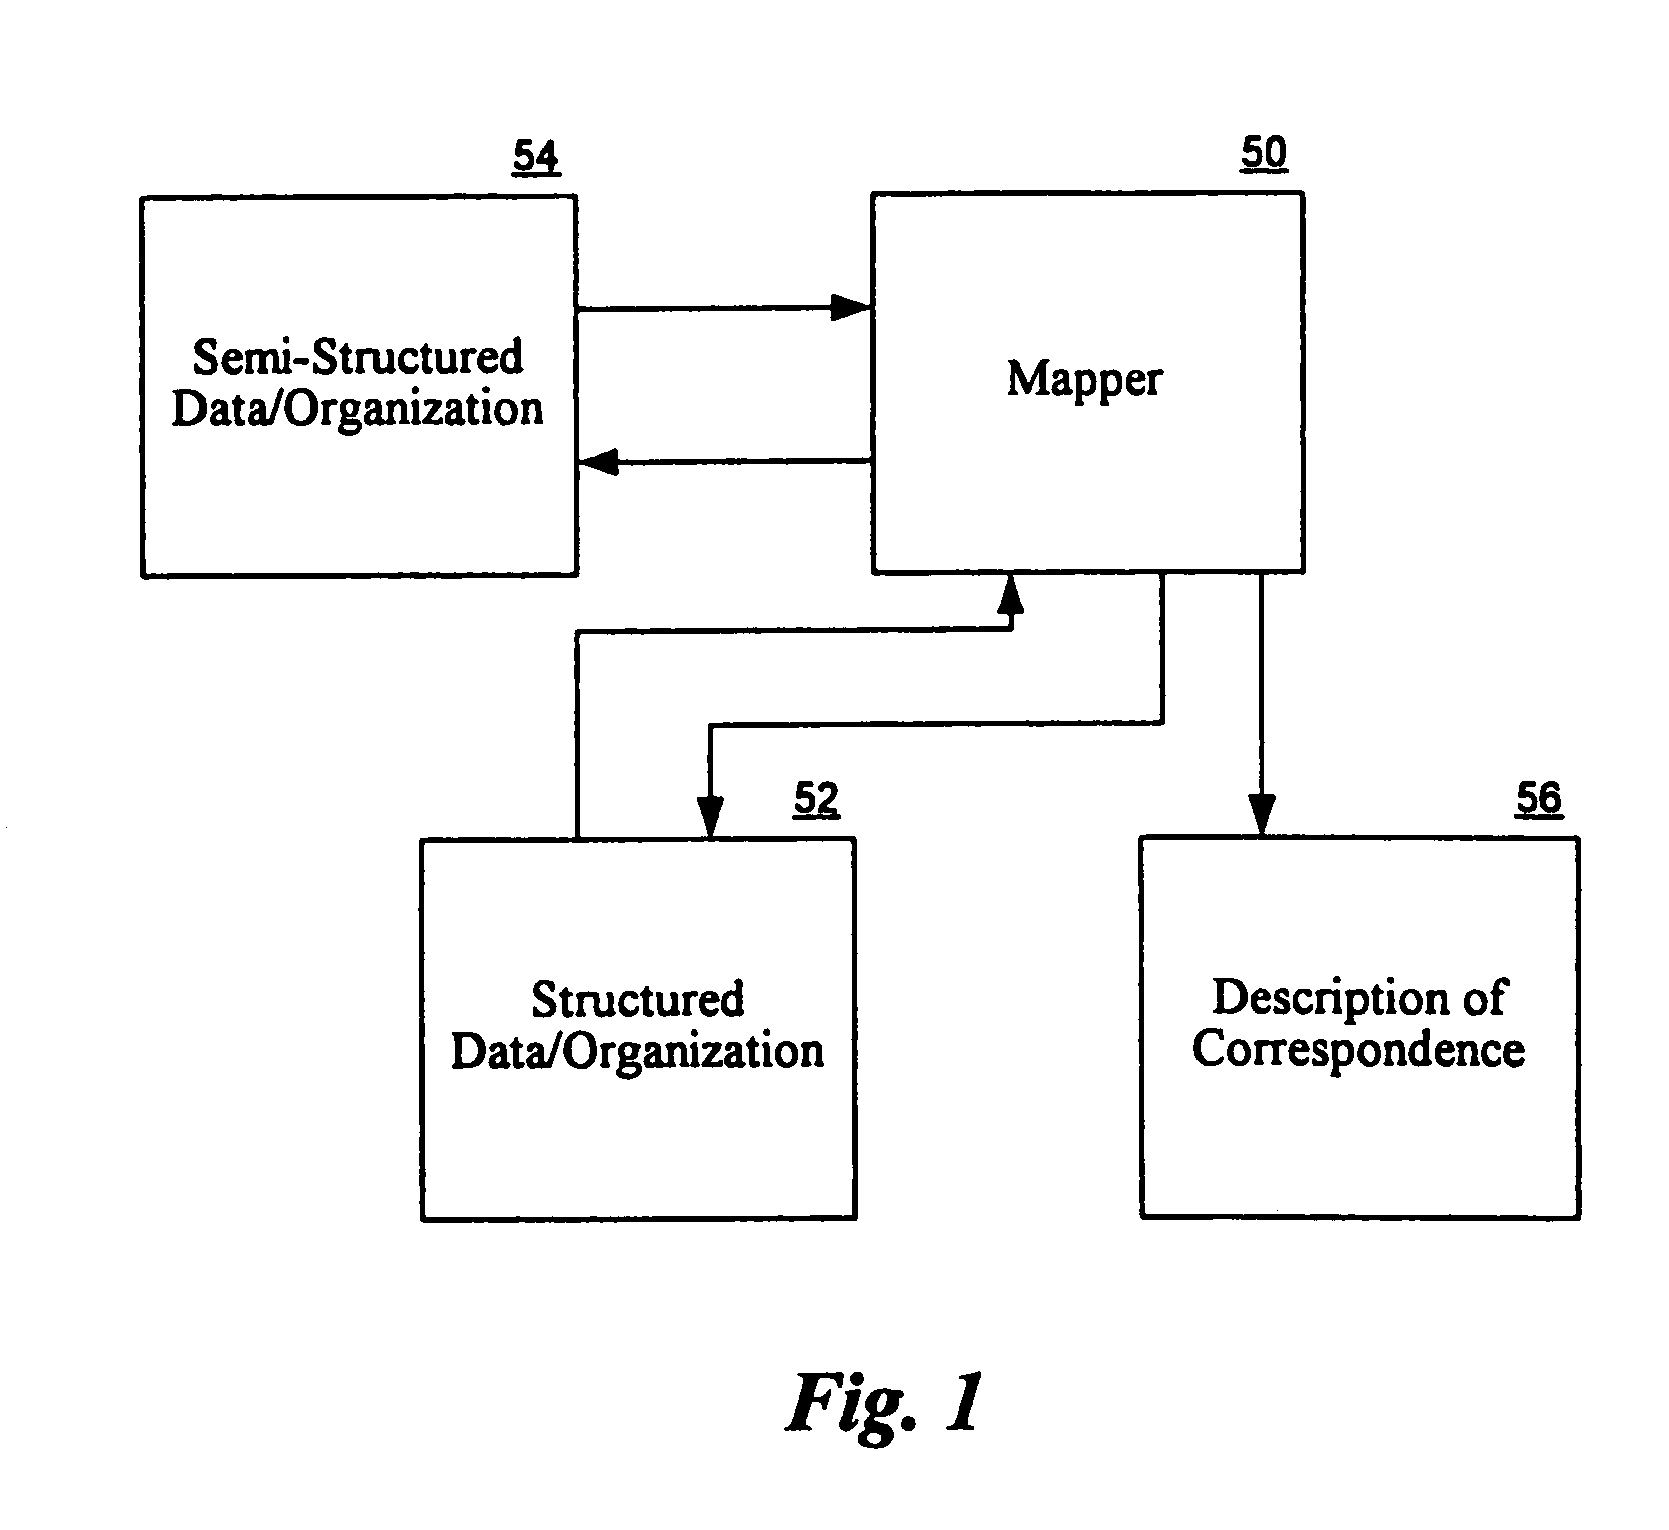 Method and apparatus for storing semi-structured data in a structured manner